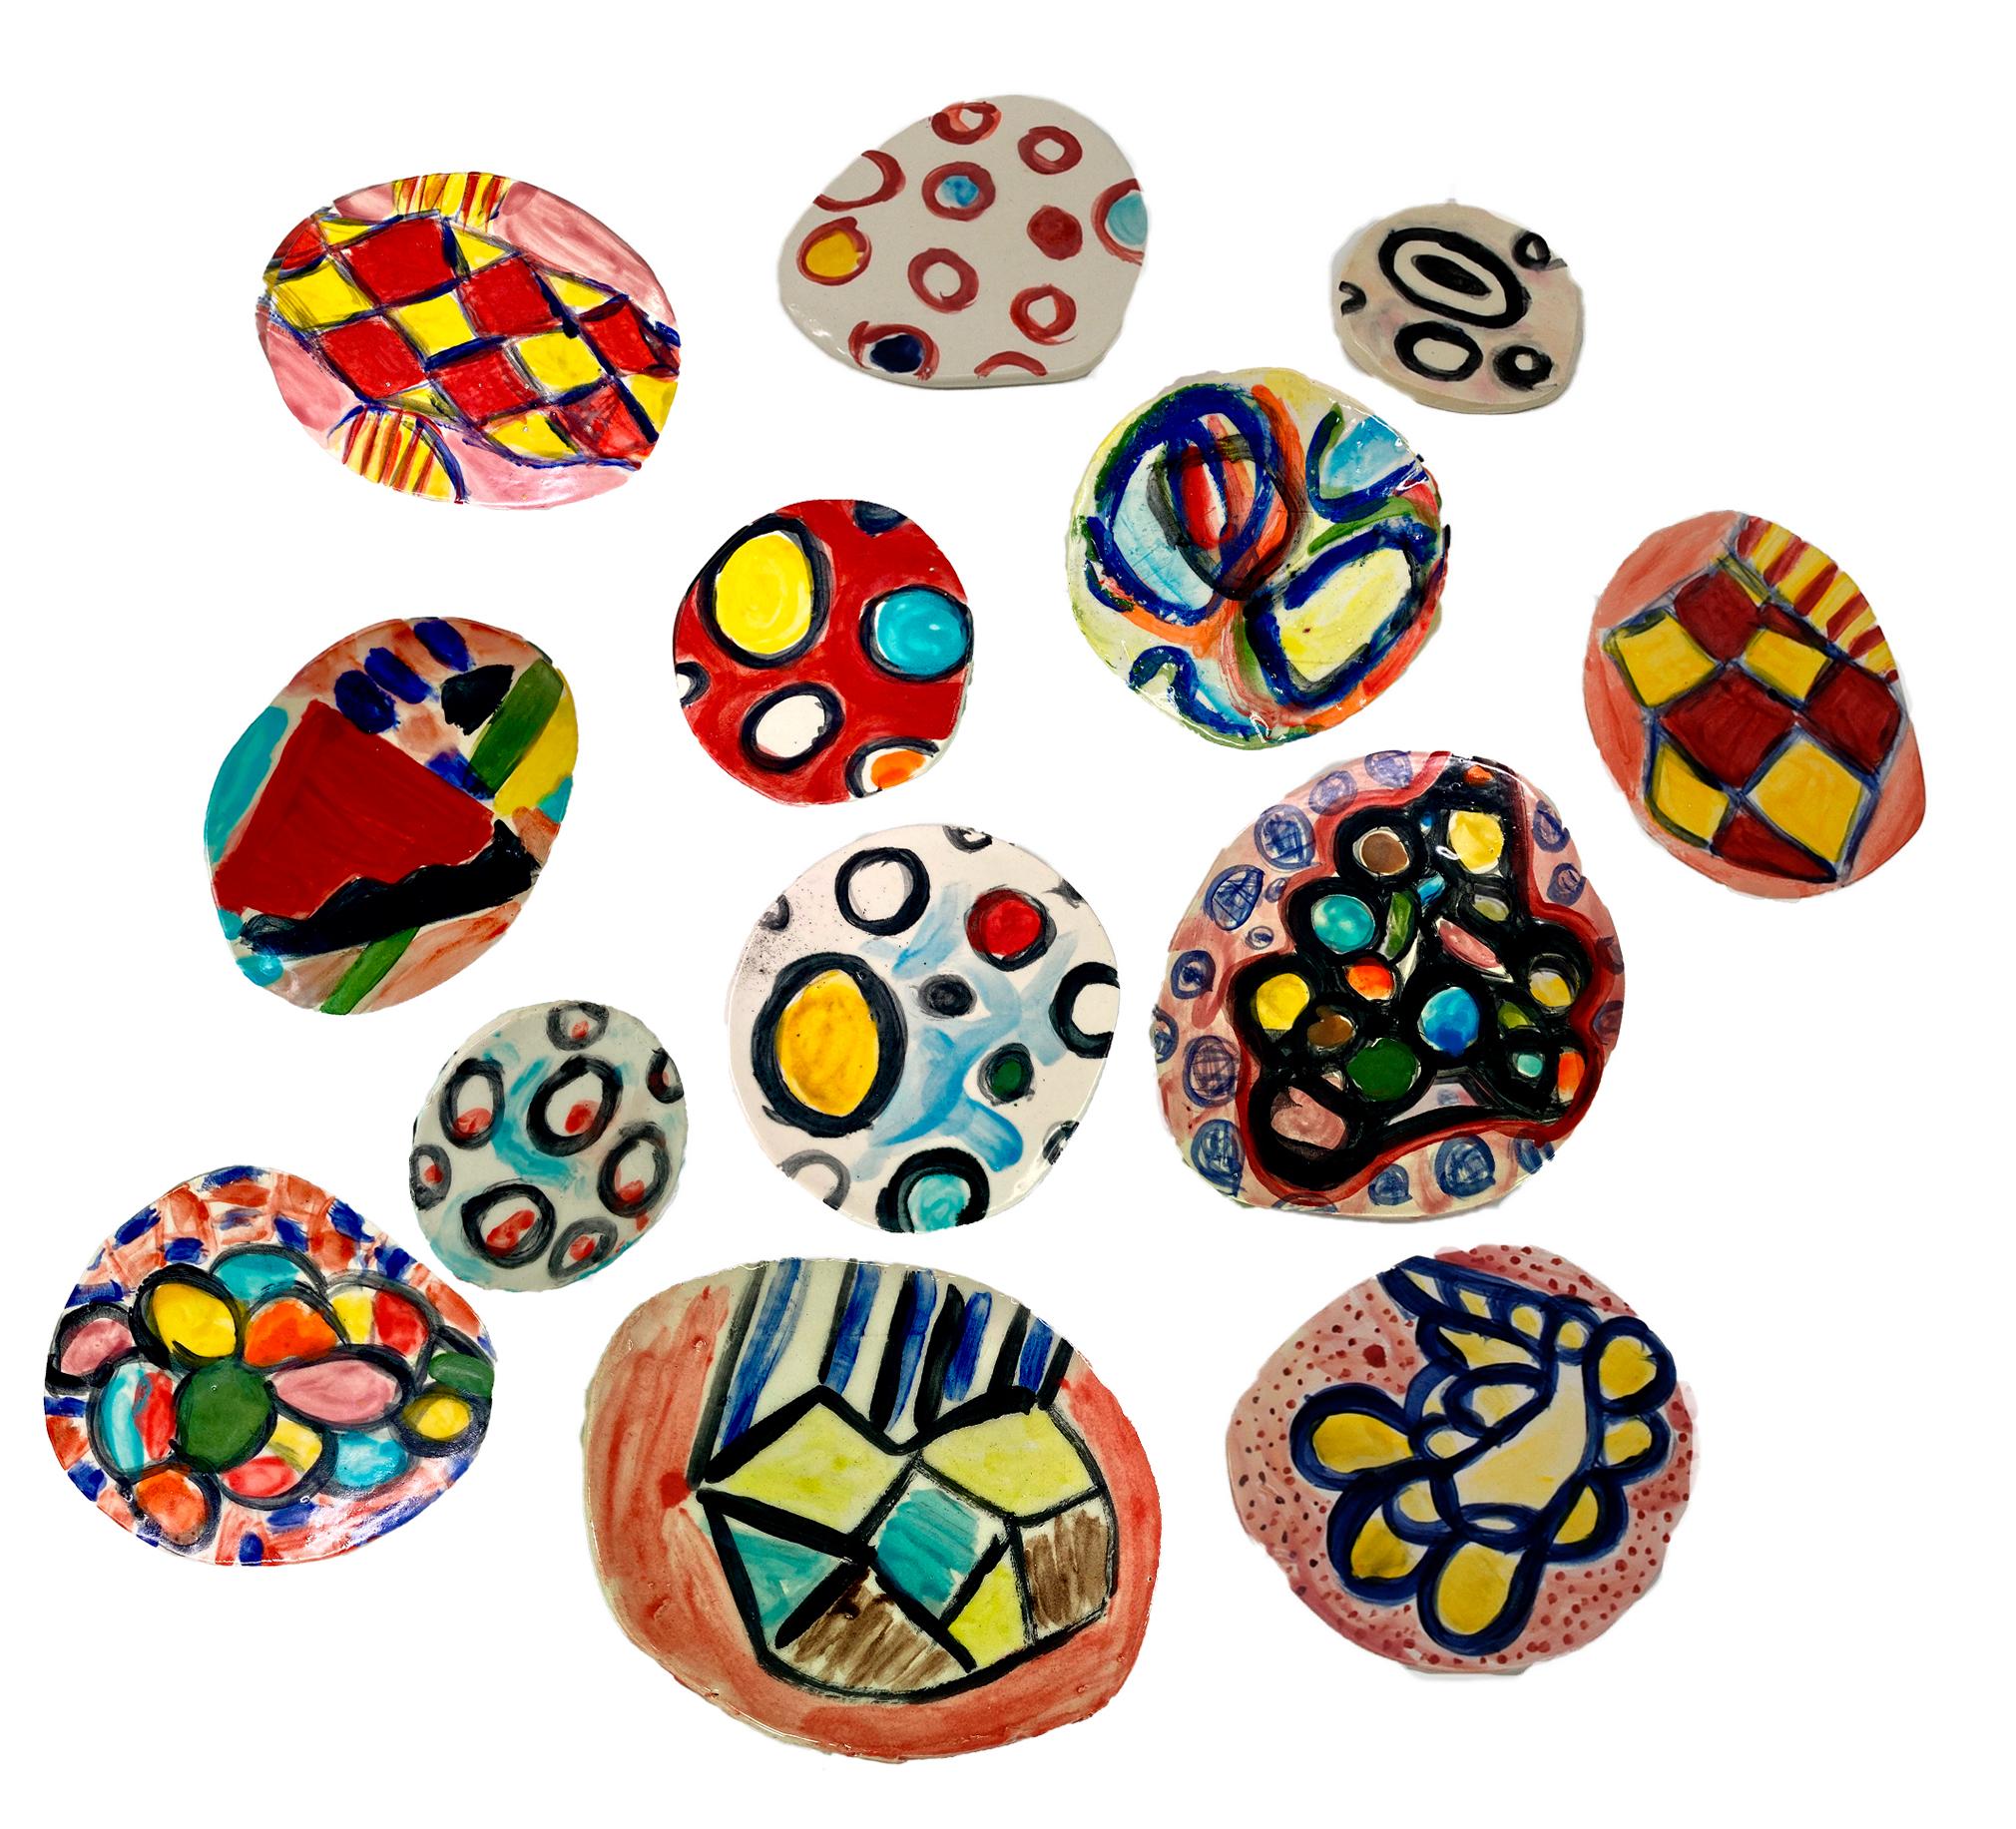 Charo Oquet Abstract Sculpture - Wall Abstract sculpture Untitled XXII. Set of 13 Glazed Ceramic Discs